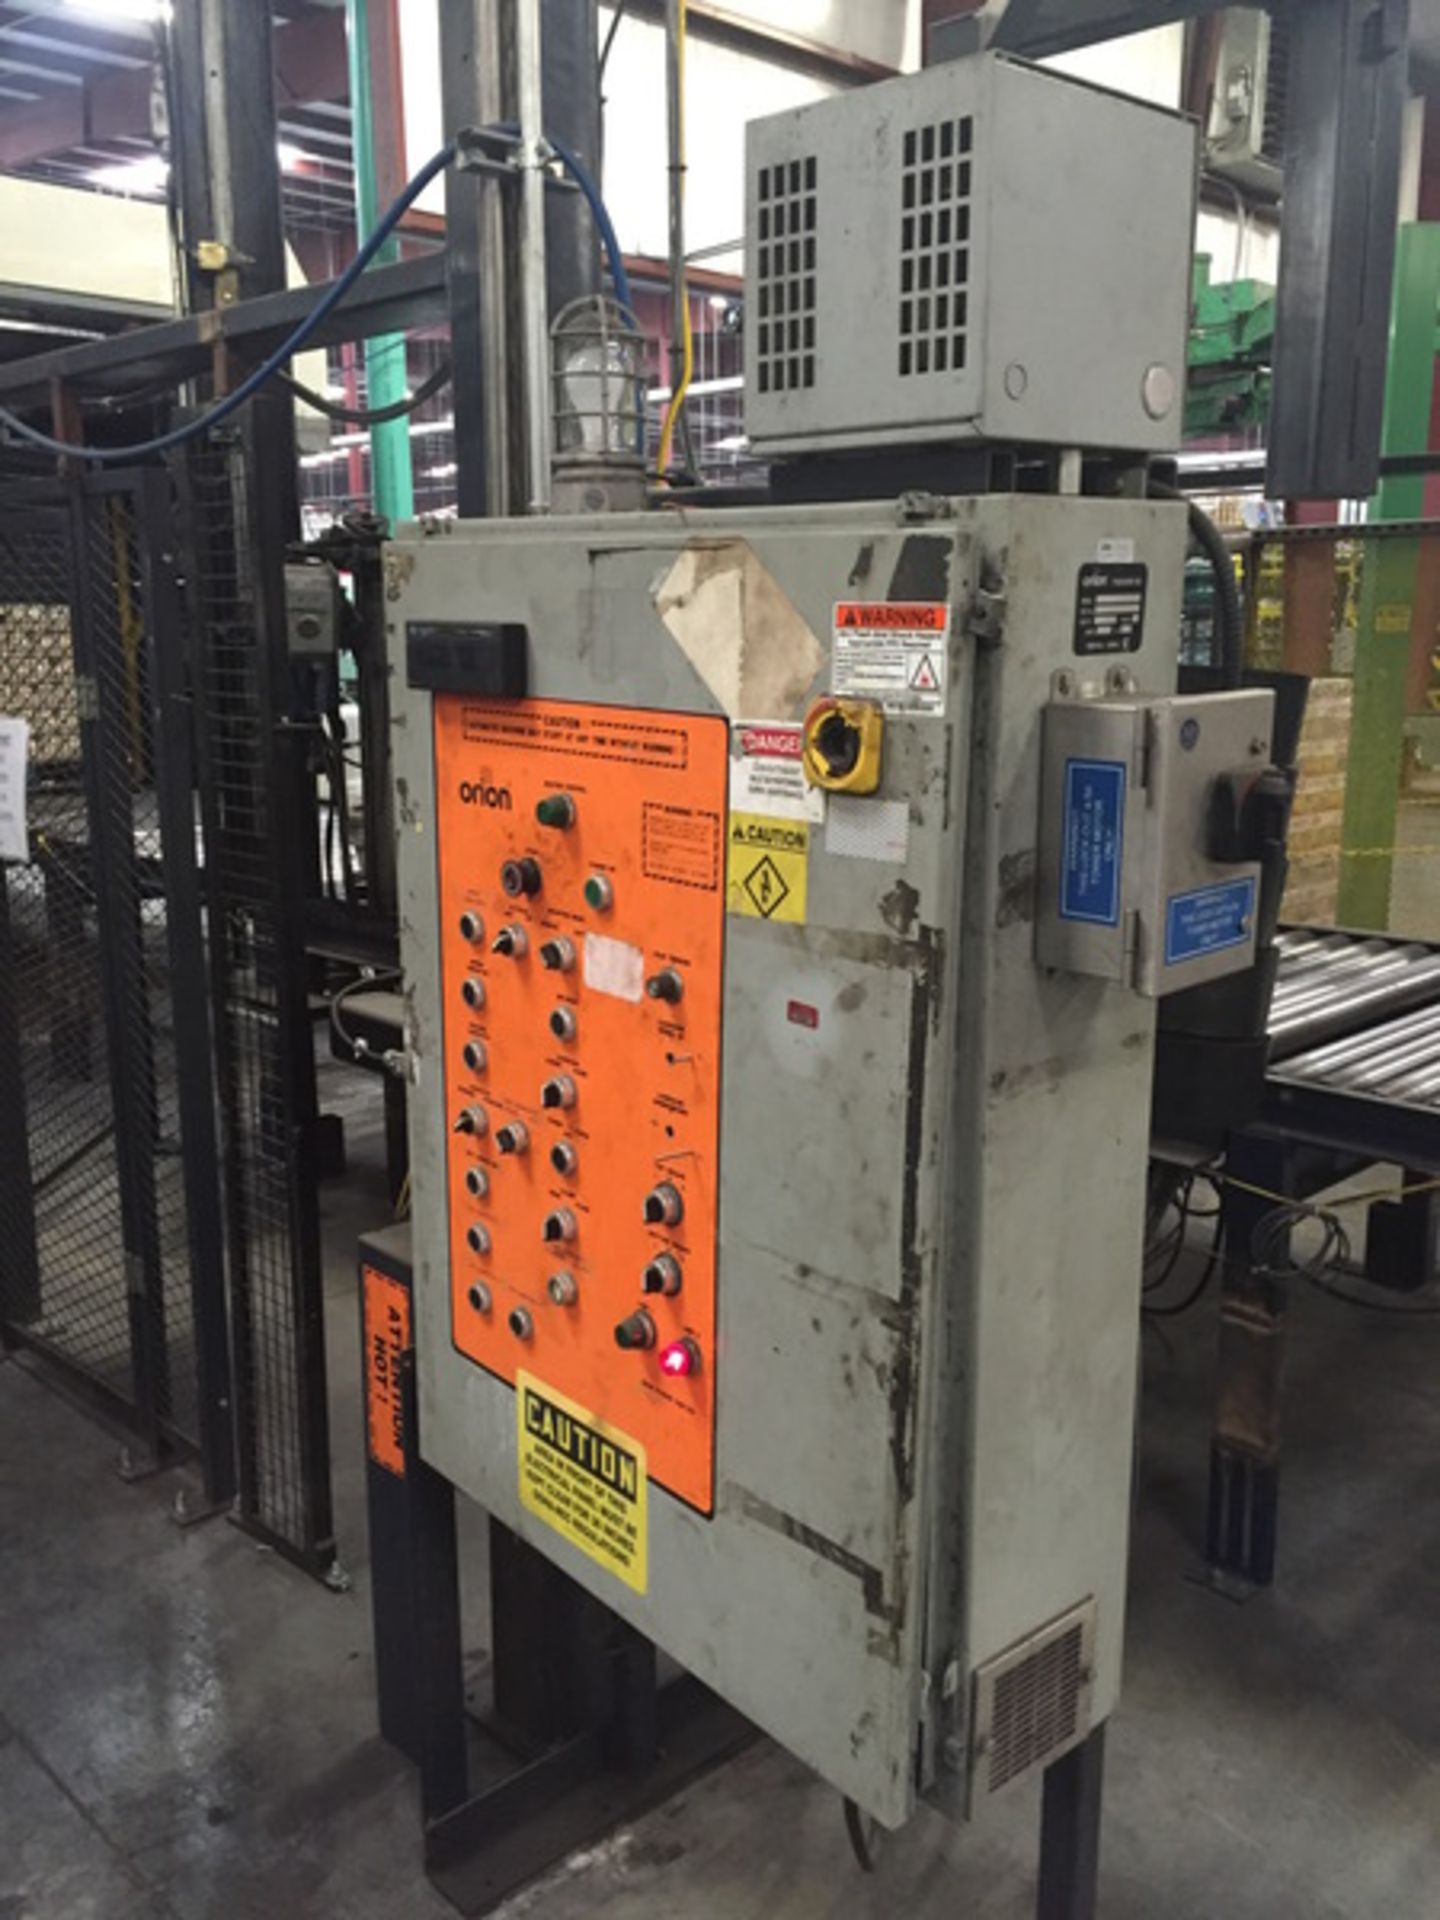 Orion MA44 Rotary Arm Pallet Wrapper, S/N: 4054162, Allen Bradley PLC Controlled, Includes Wrap - Image 6 of 7